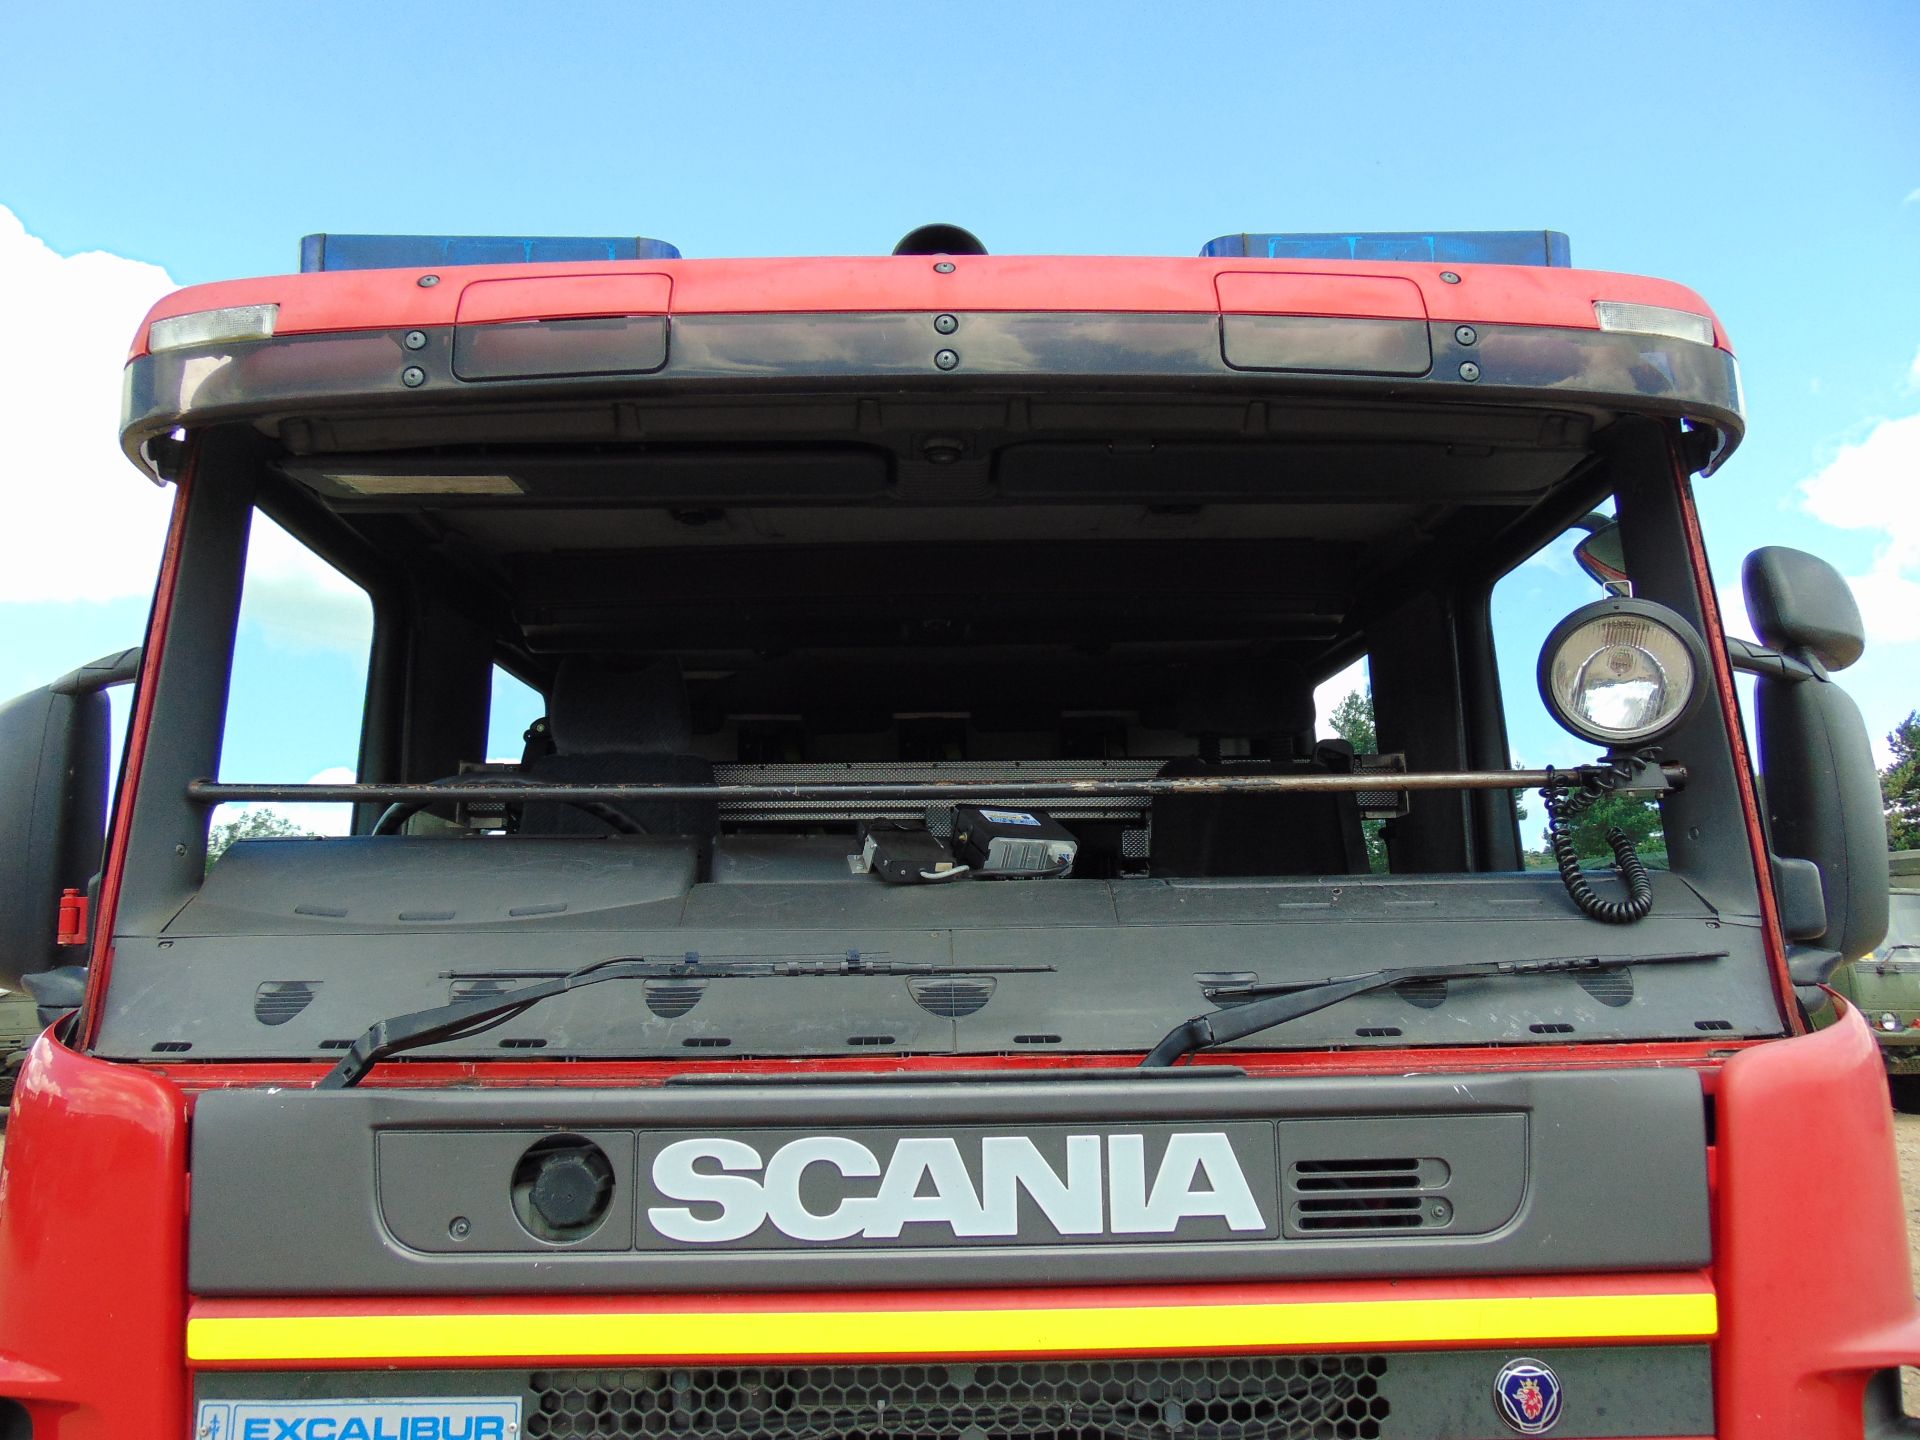 Scania 94D 260 Excalibur Fire Engine - Image 7 of 18